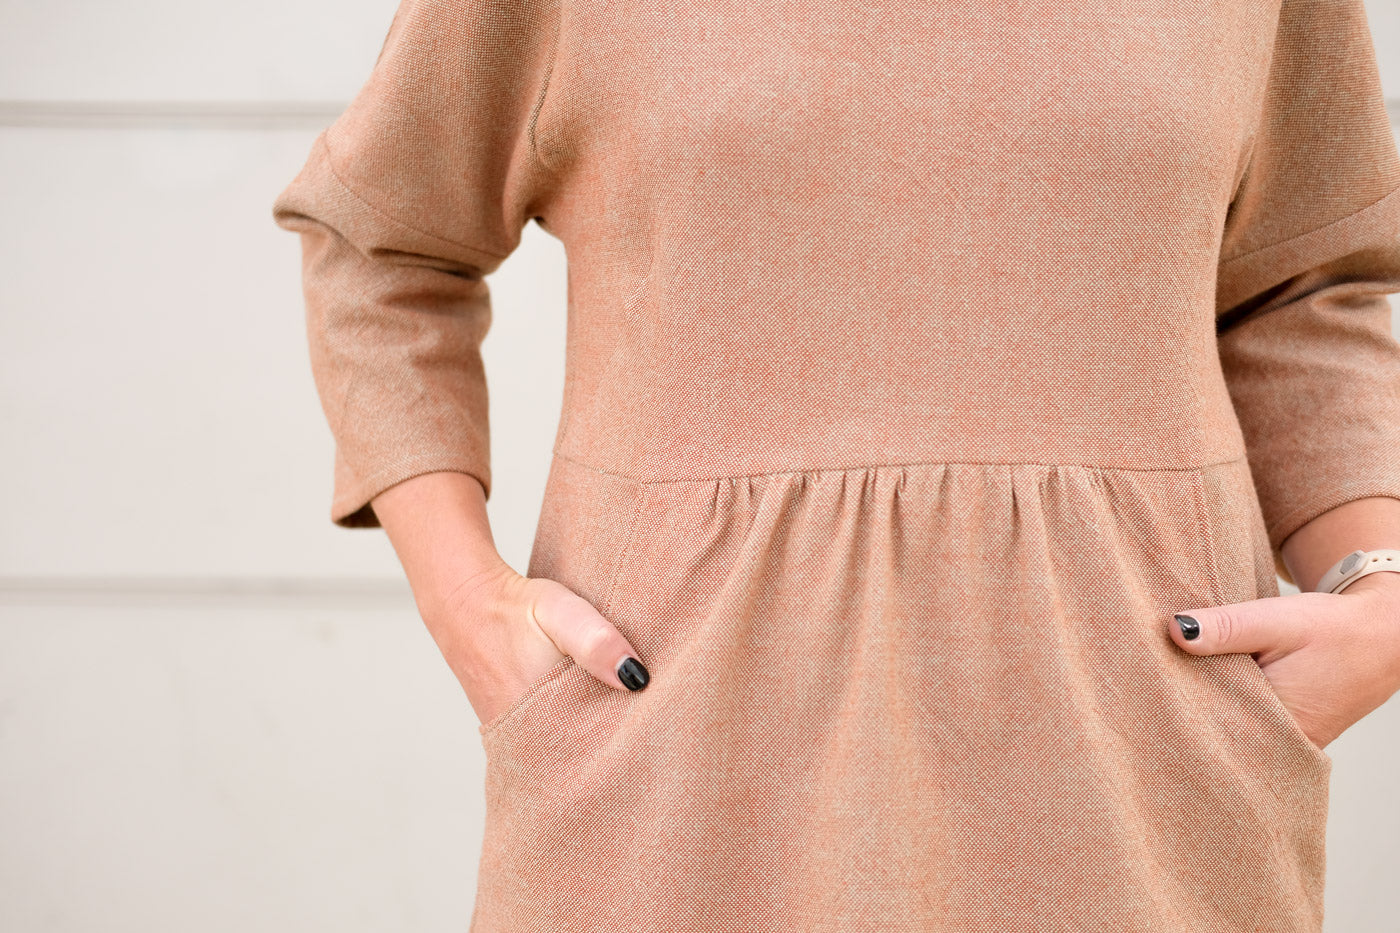 Detail of the waist and pockets of the Fen dress. It shows a close up of the subtly textured, plain weave fabric, and Jaime's hands in the waist pockets.